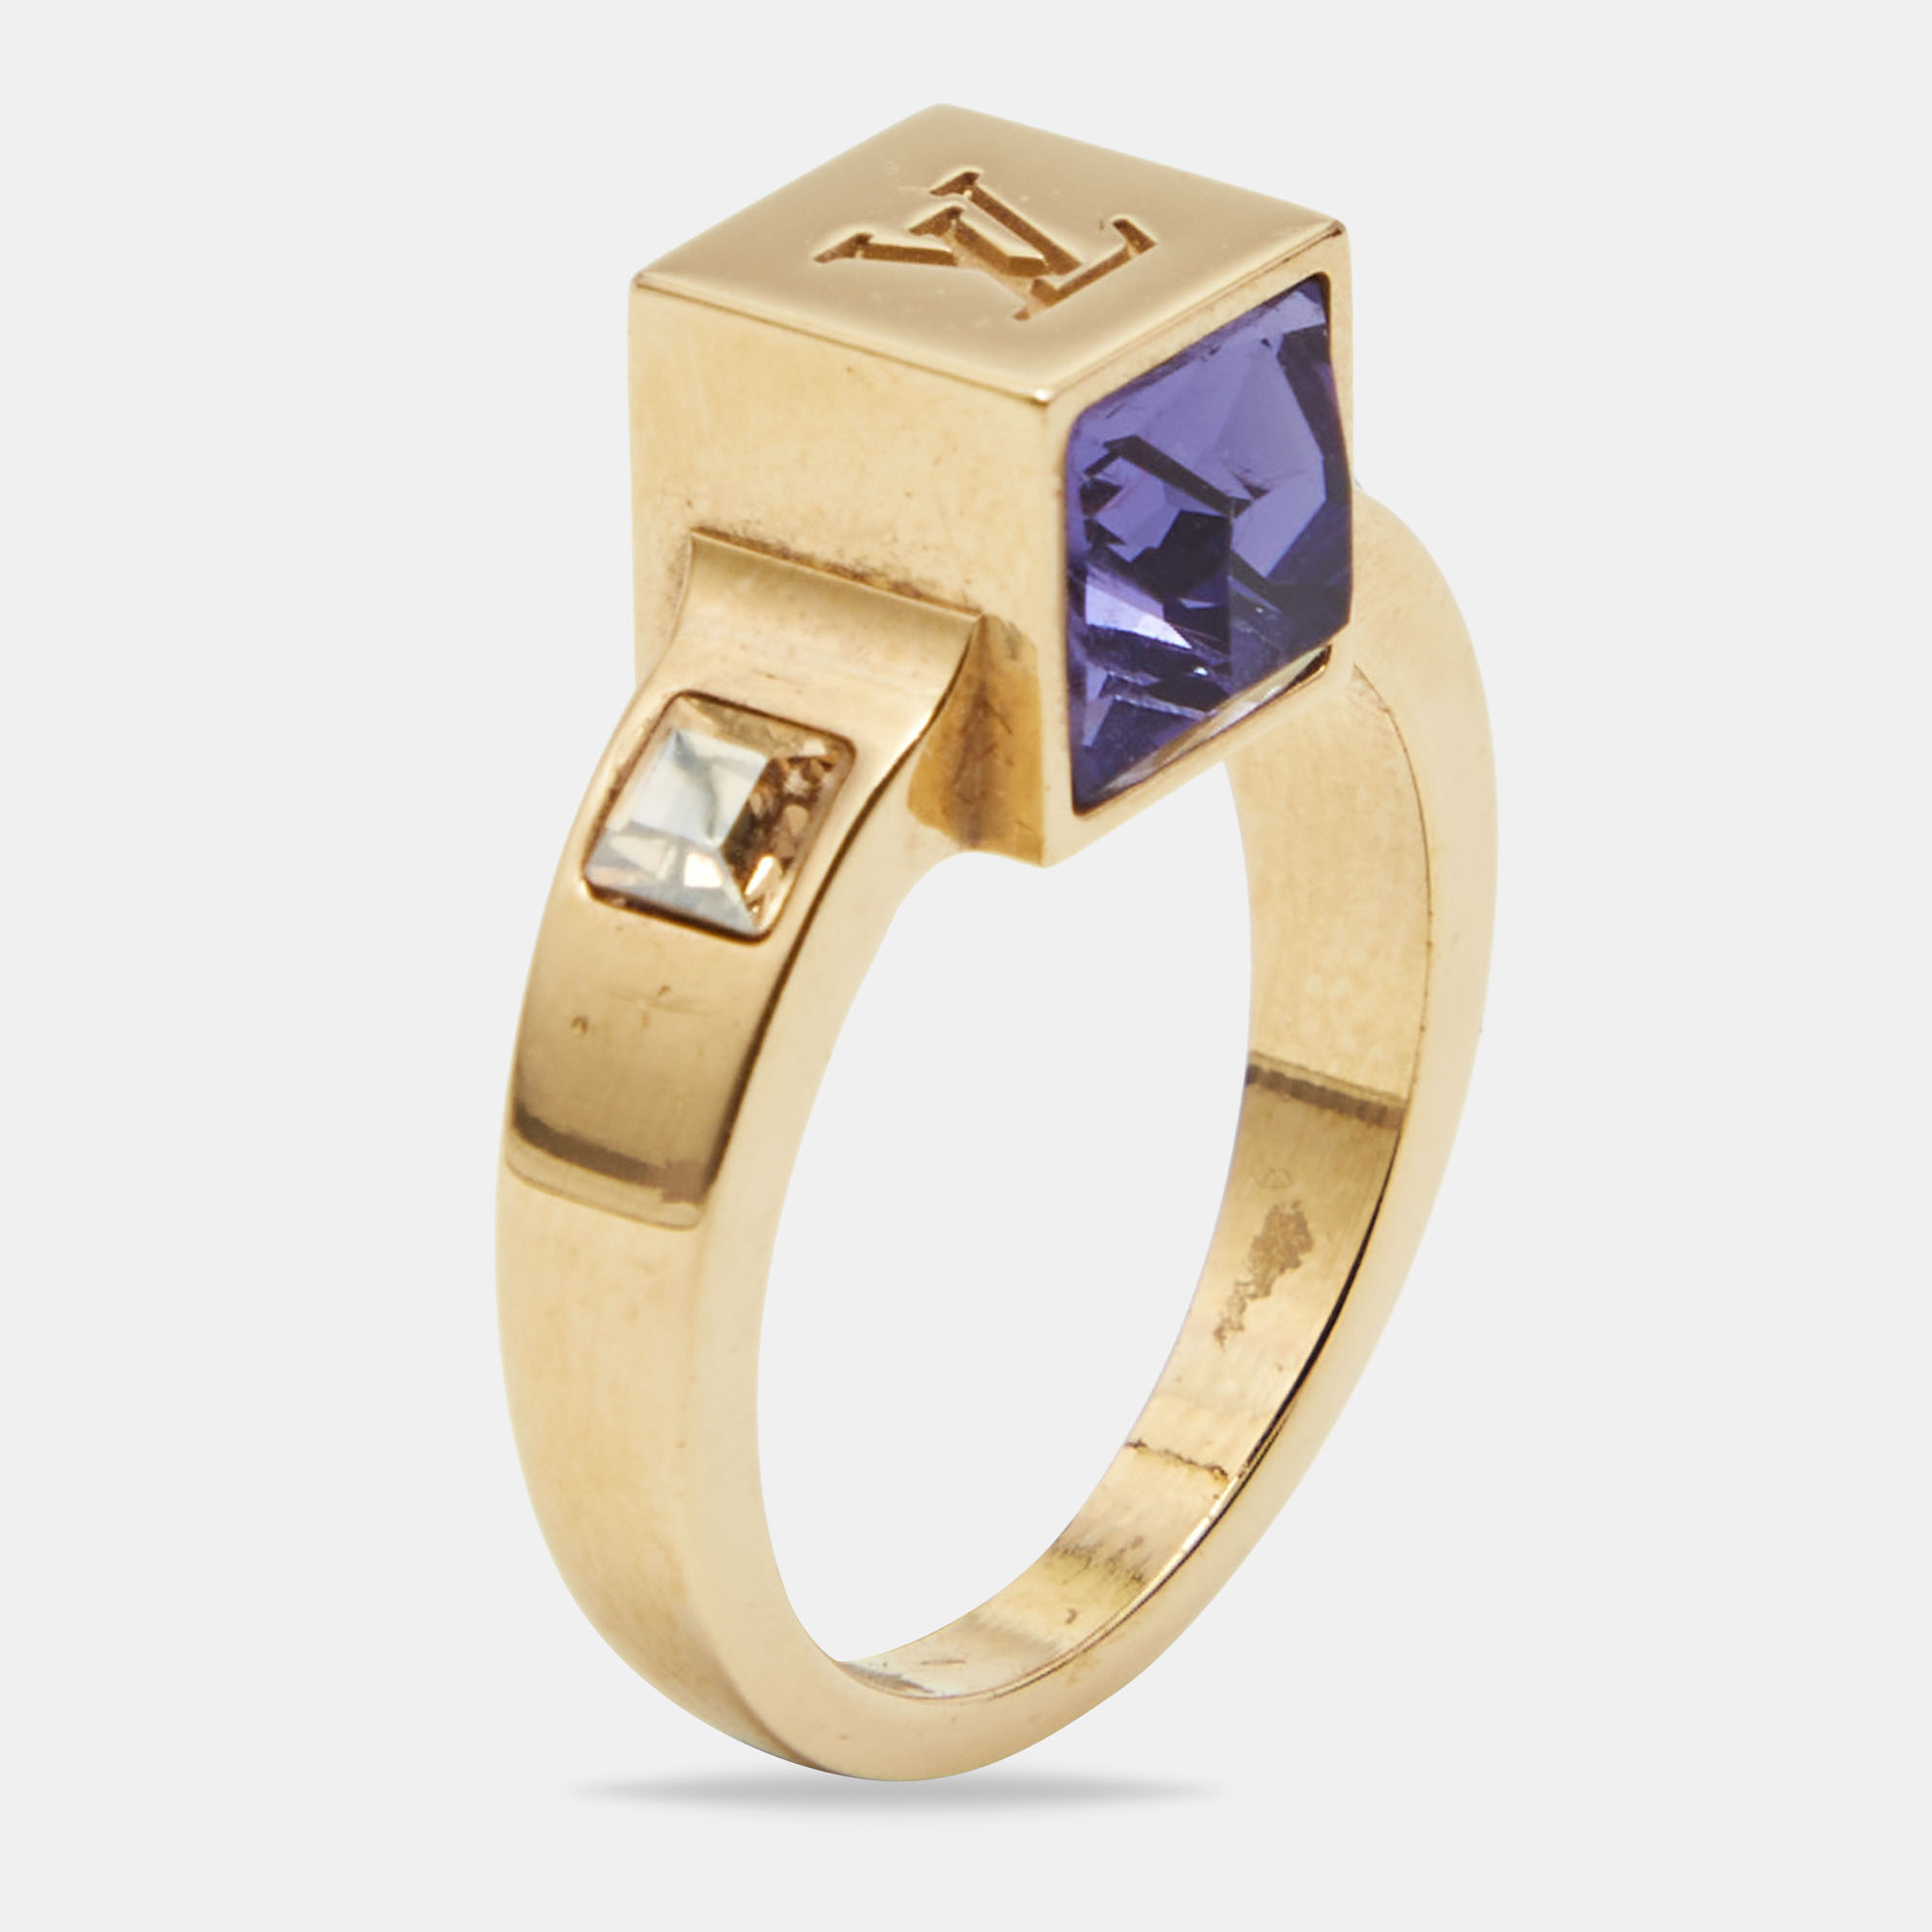 Louis Vuitton Gamble Crystals Gold Tone Ring Size 50